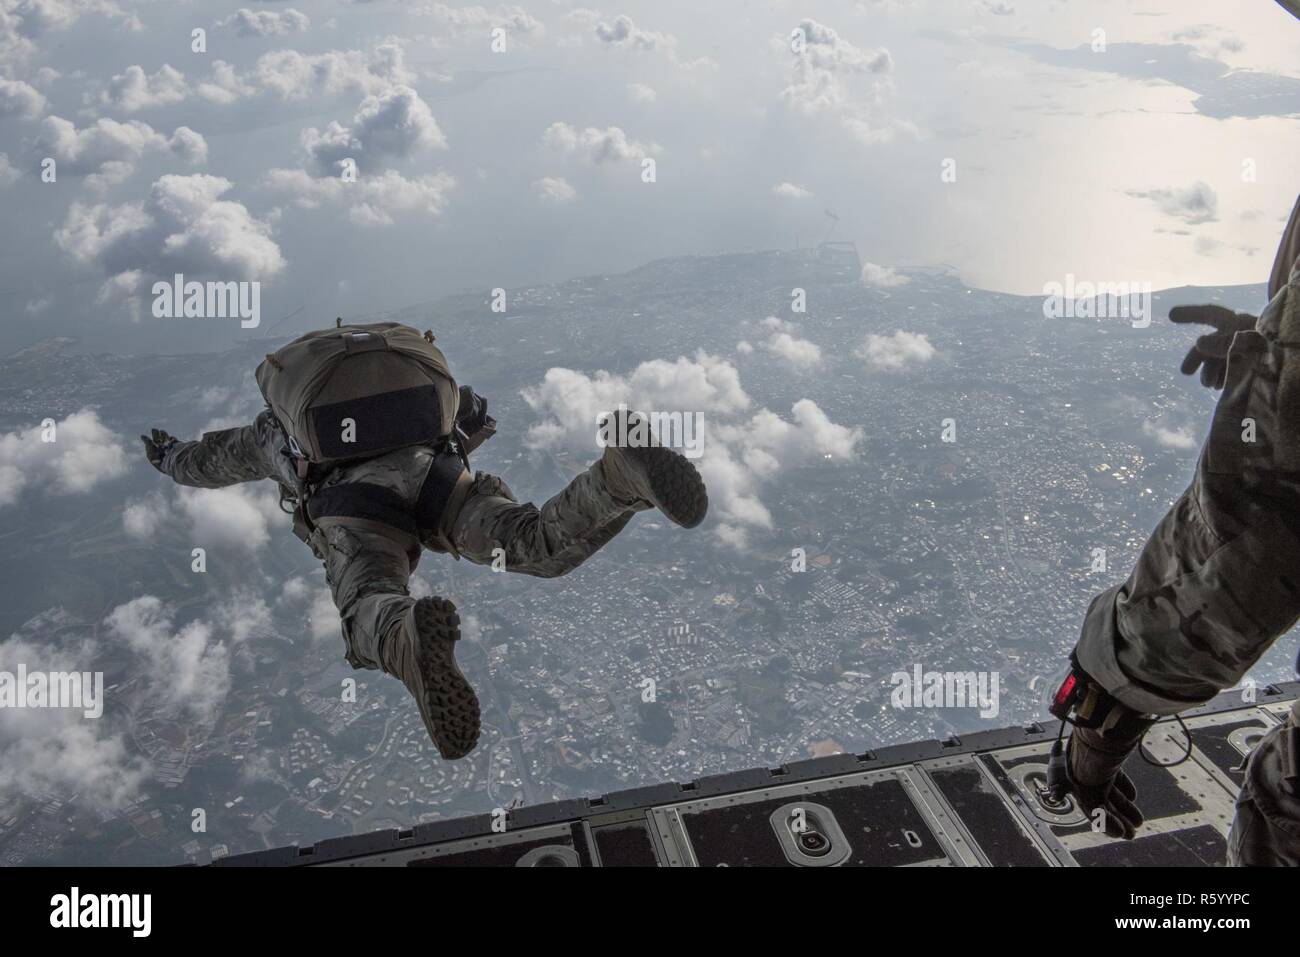 U.S. Air Force Airmen conduct a high altitude, low opening jump off an ...